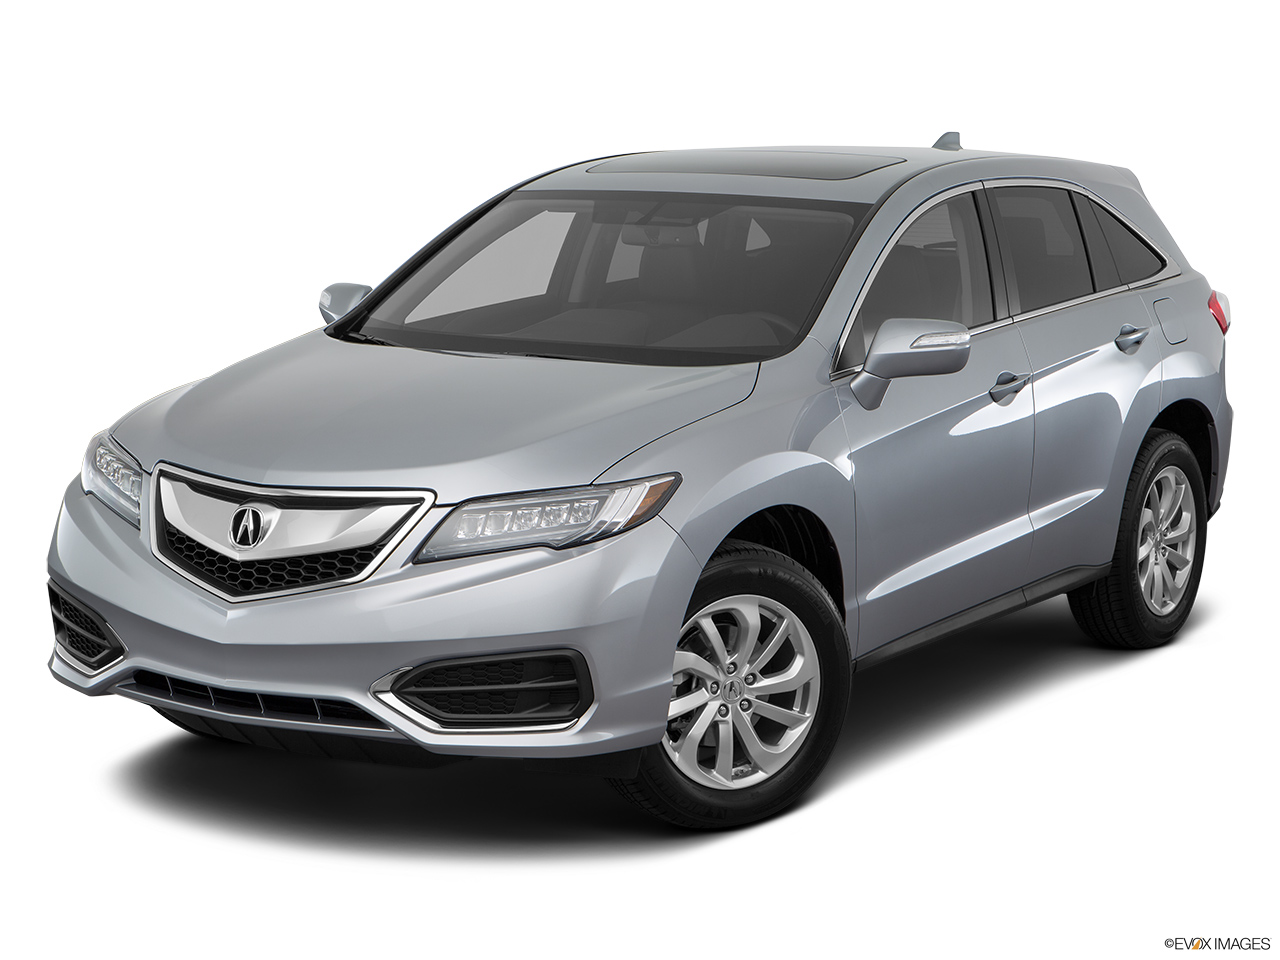 2017 Acura RDX AWD Front angle view. 